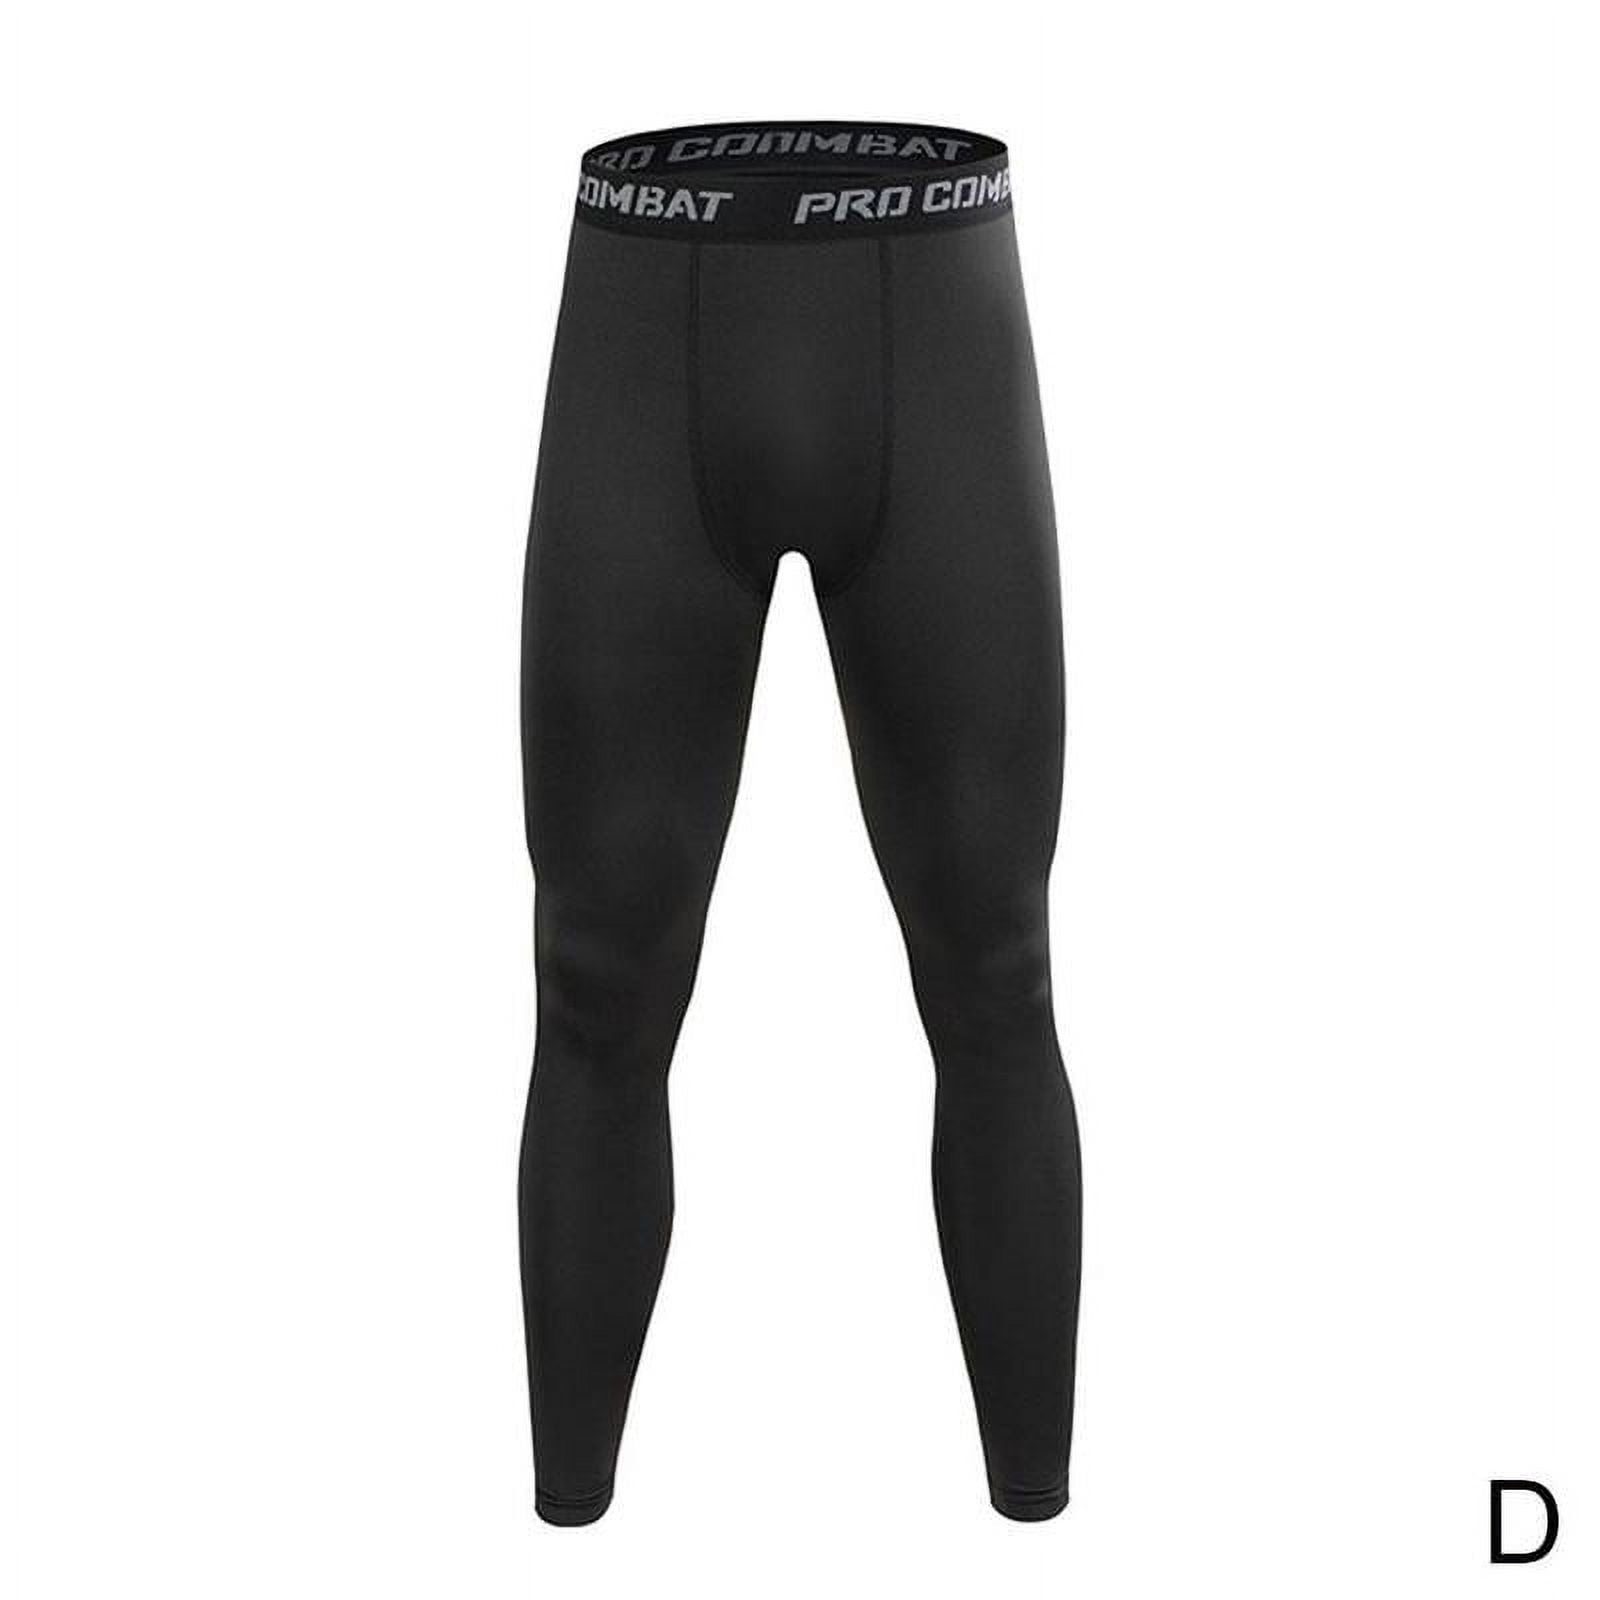 YiZYiF Mens Glossy Workout Fitness Leggings Ultra Shiny Stretchy Dance Pants  Tights 